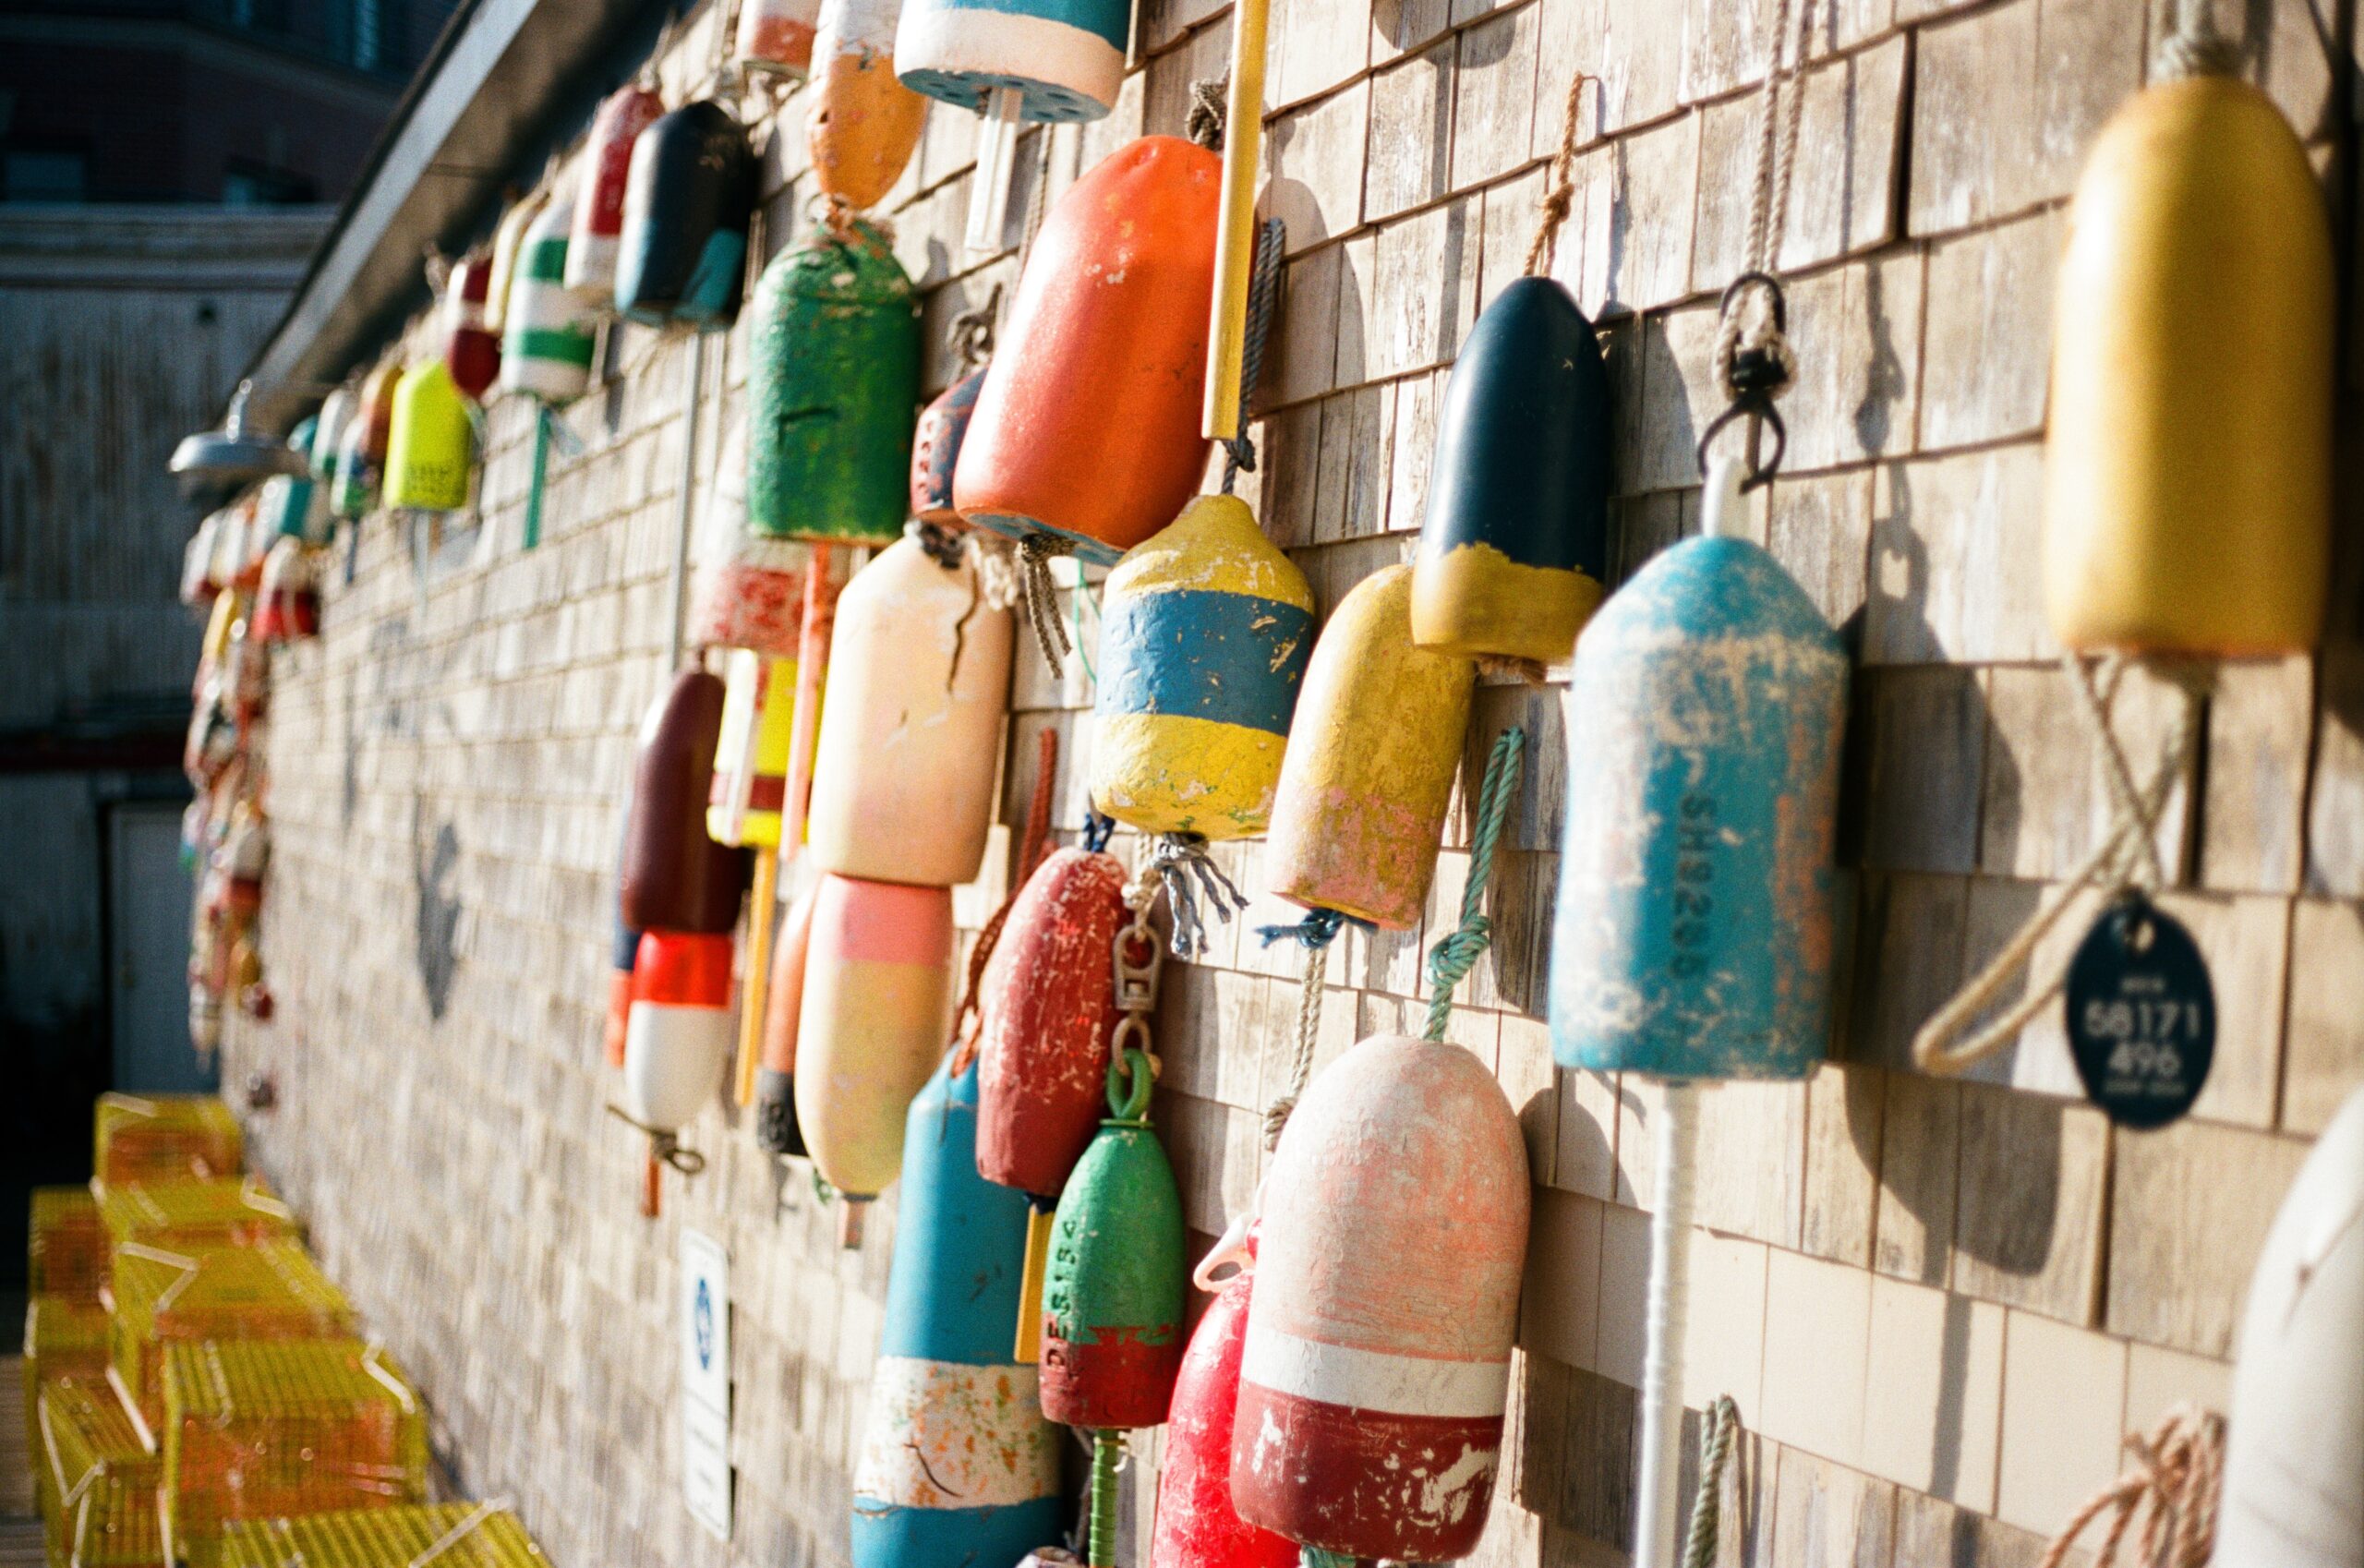 Buoys on the side of a building